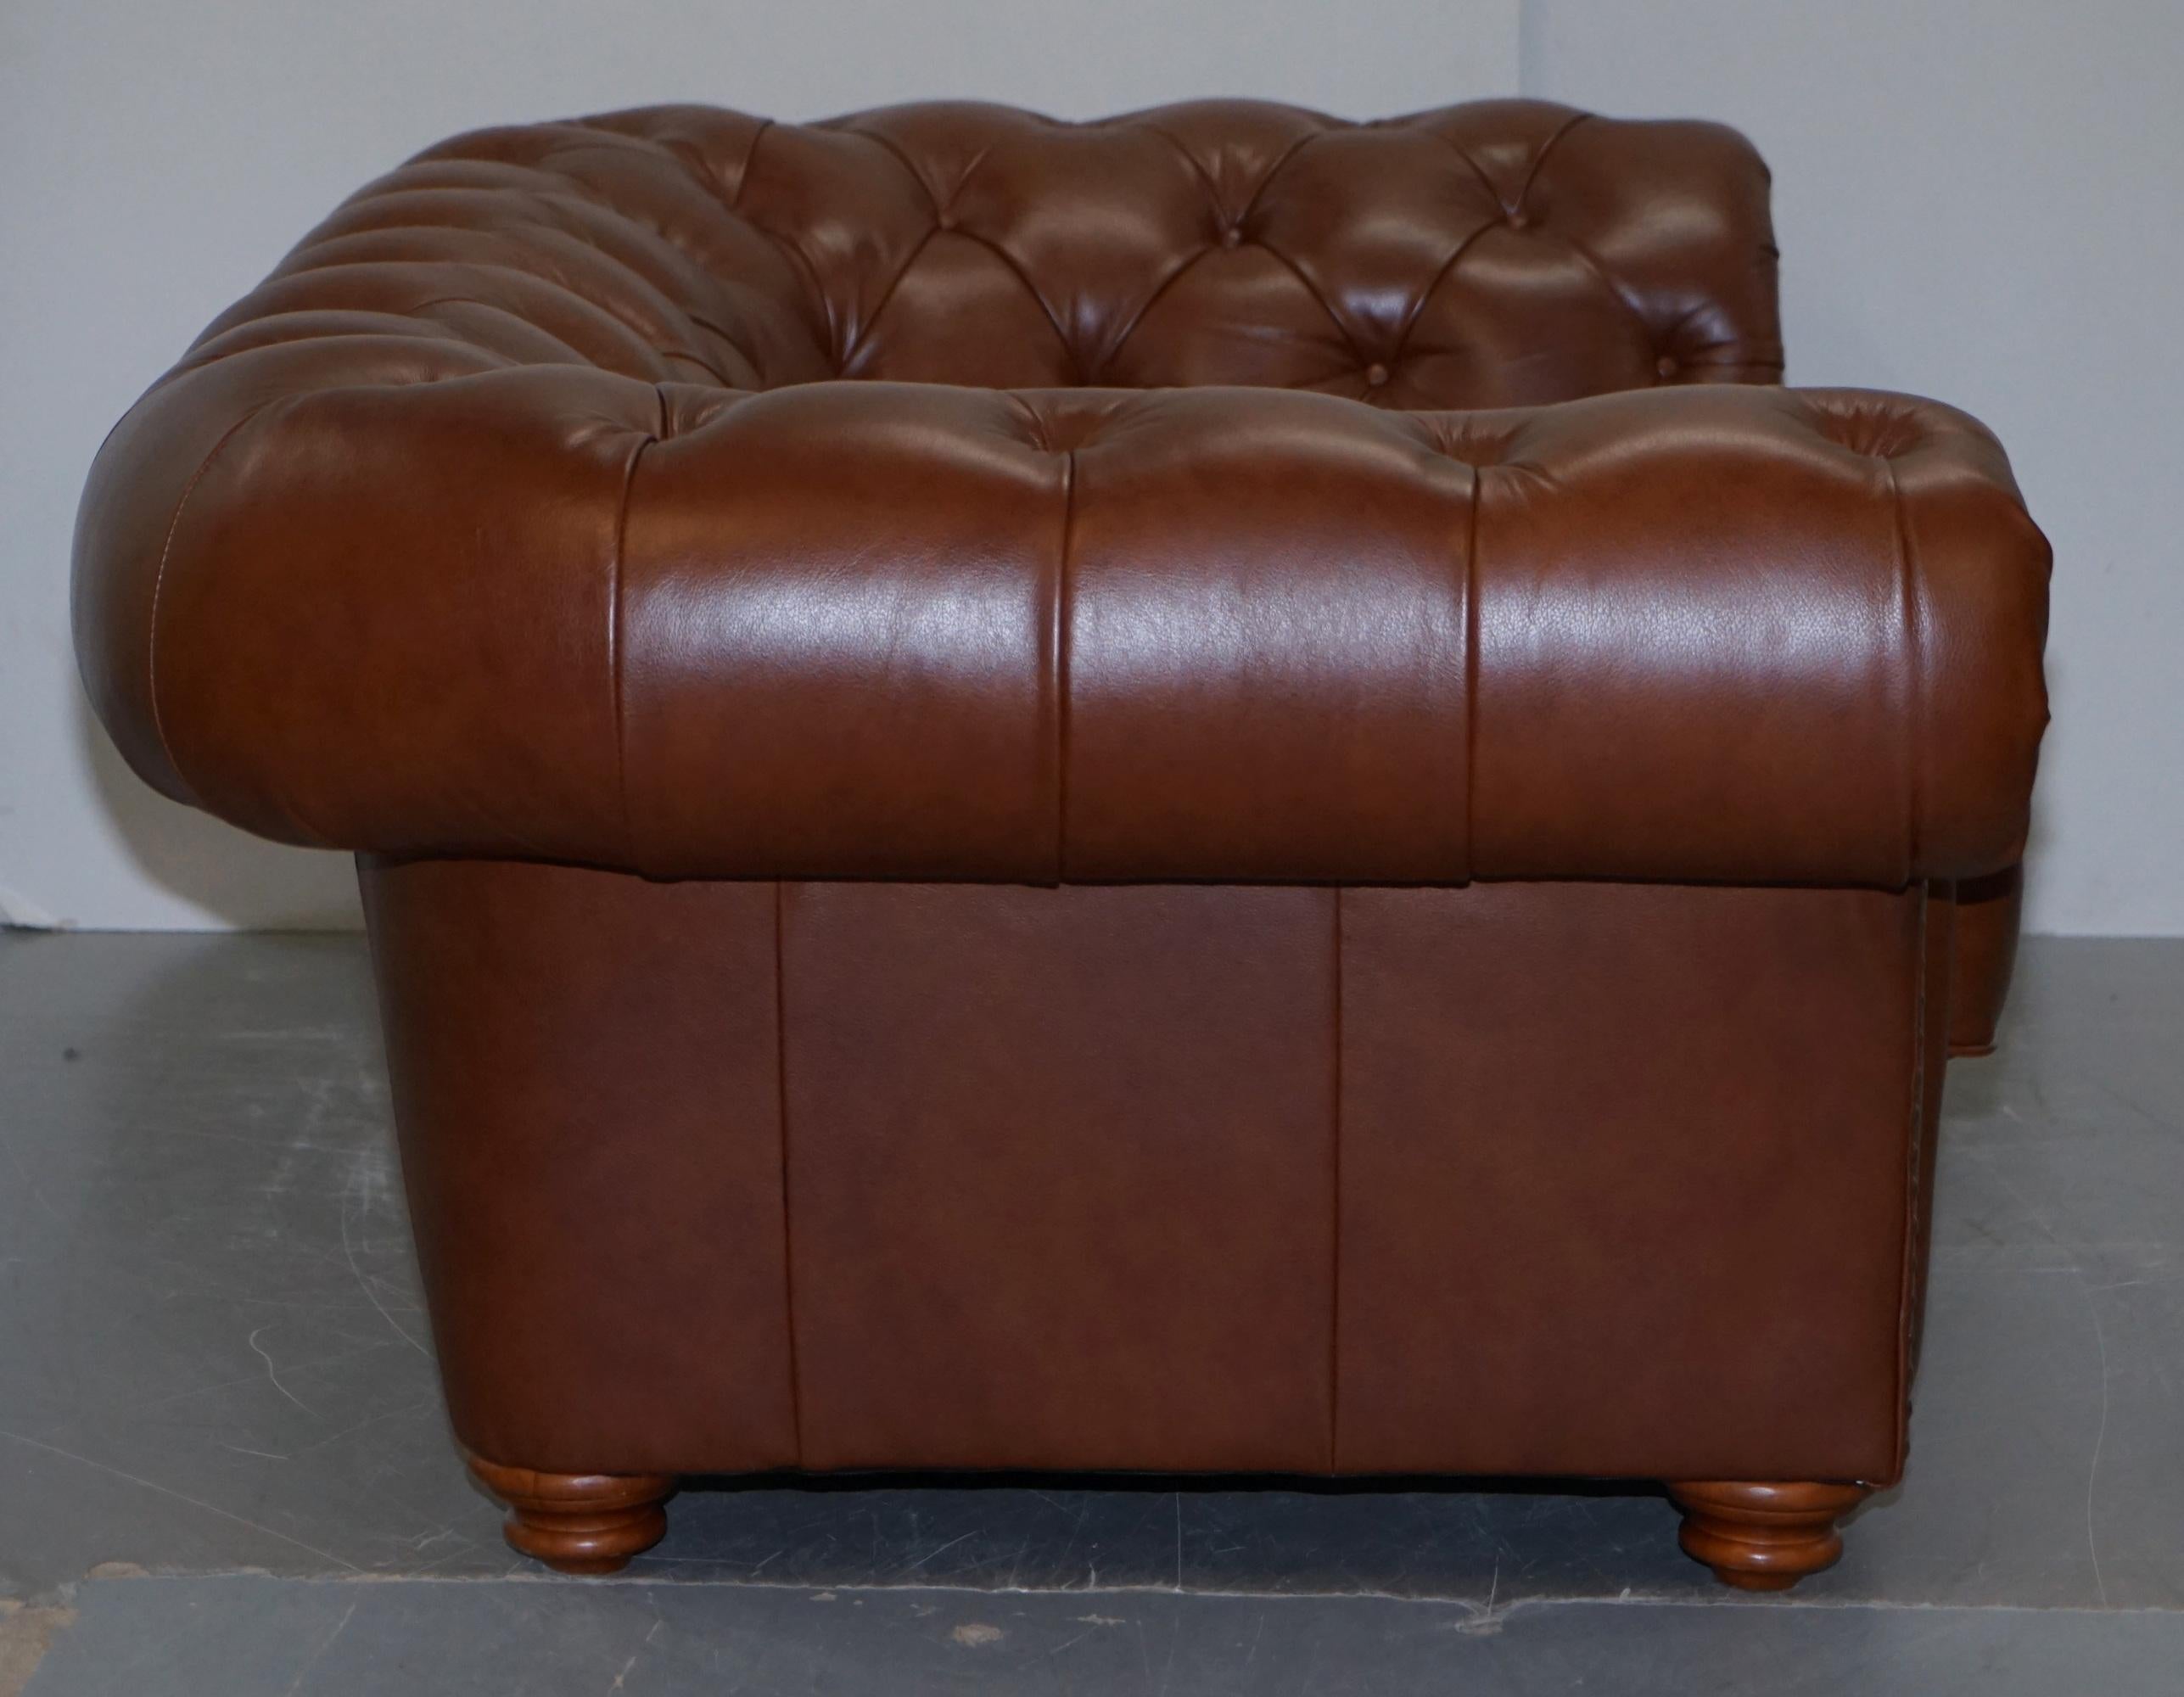 Medium Tetrad Made in England Brown Leather Chesterfield Sofa Part of Full Suite 4